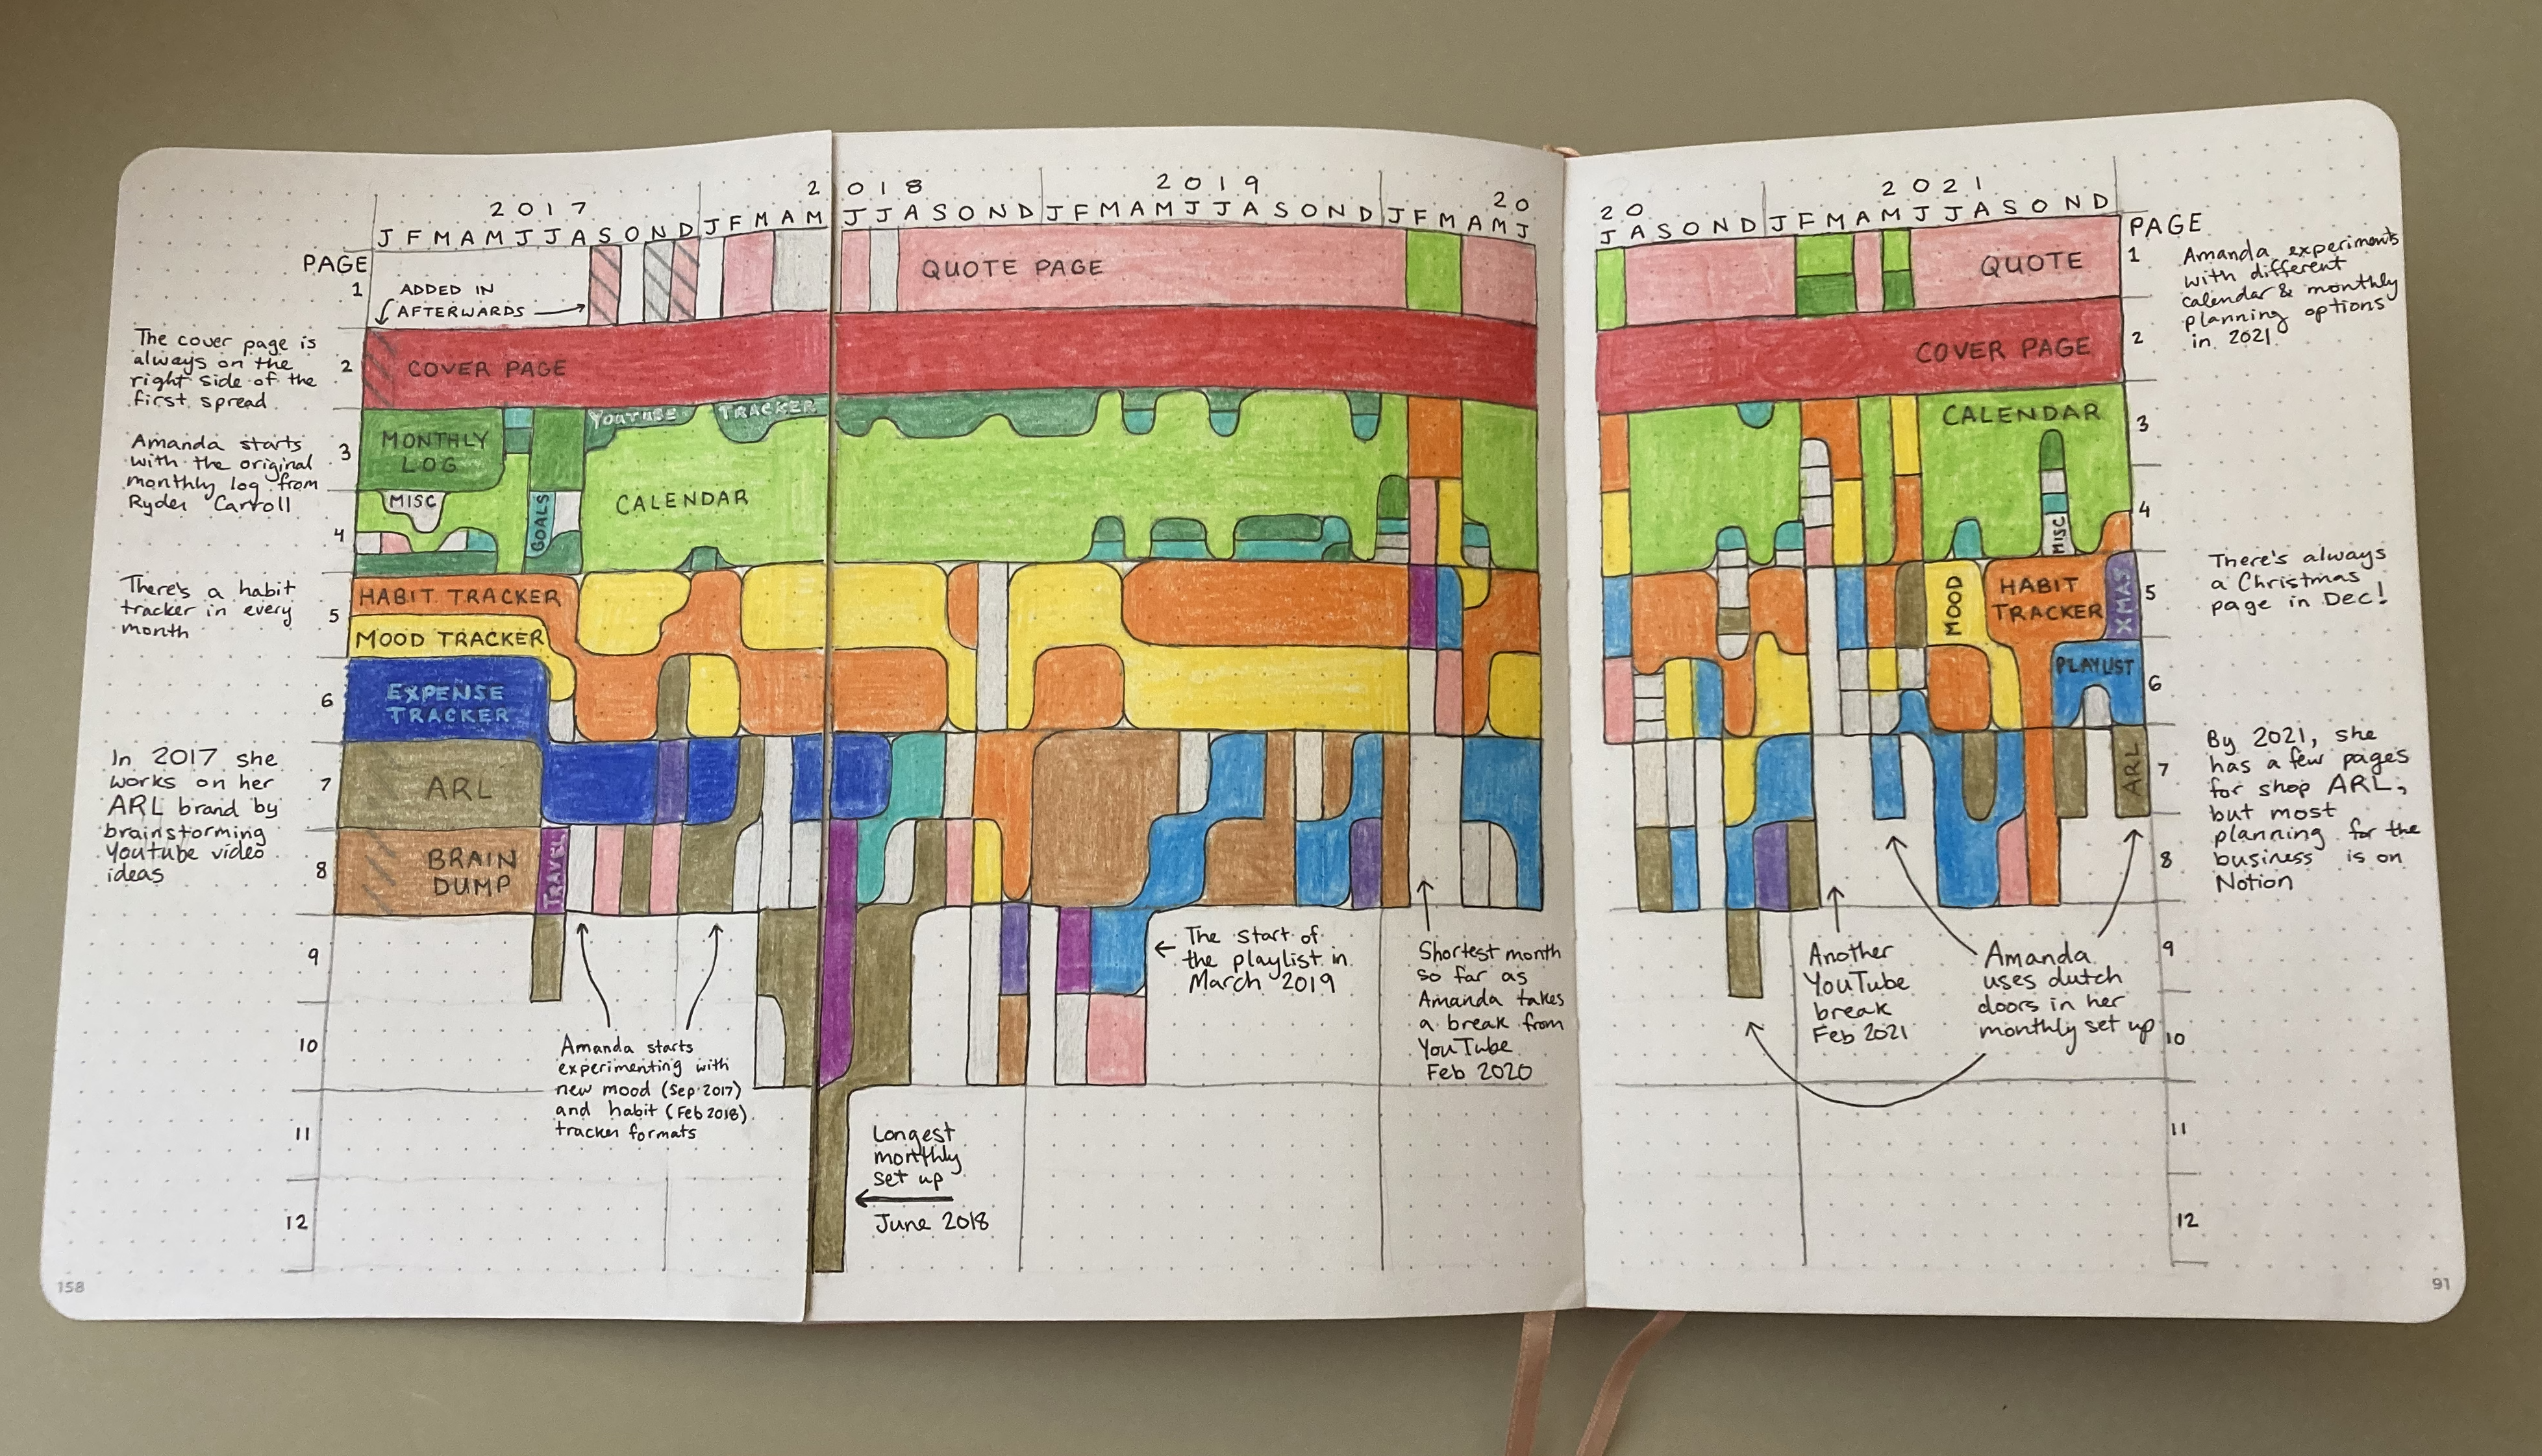 A visualization of the design elements of Amanda Rach Lee’s bullet journal over five years from 2017 to 2021, showing the consistency of some features, the parts that got discontinued, and the new sections that were added over the years.